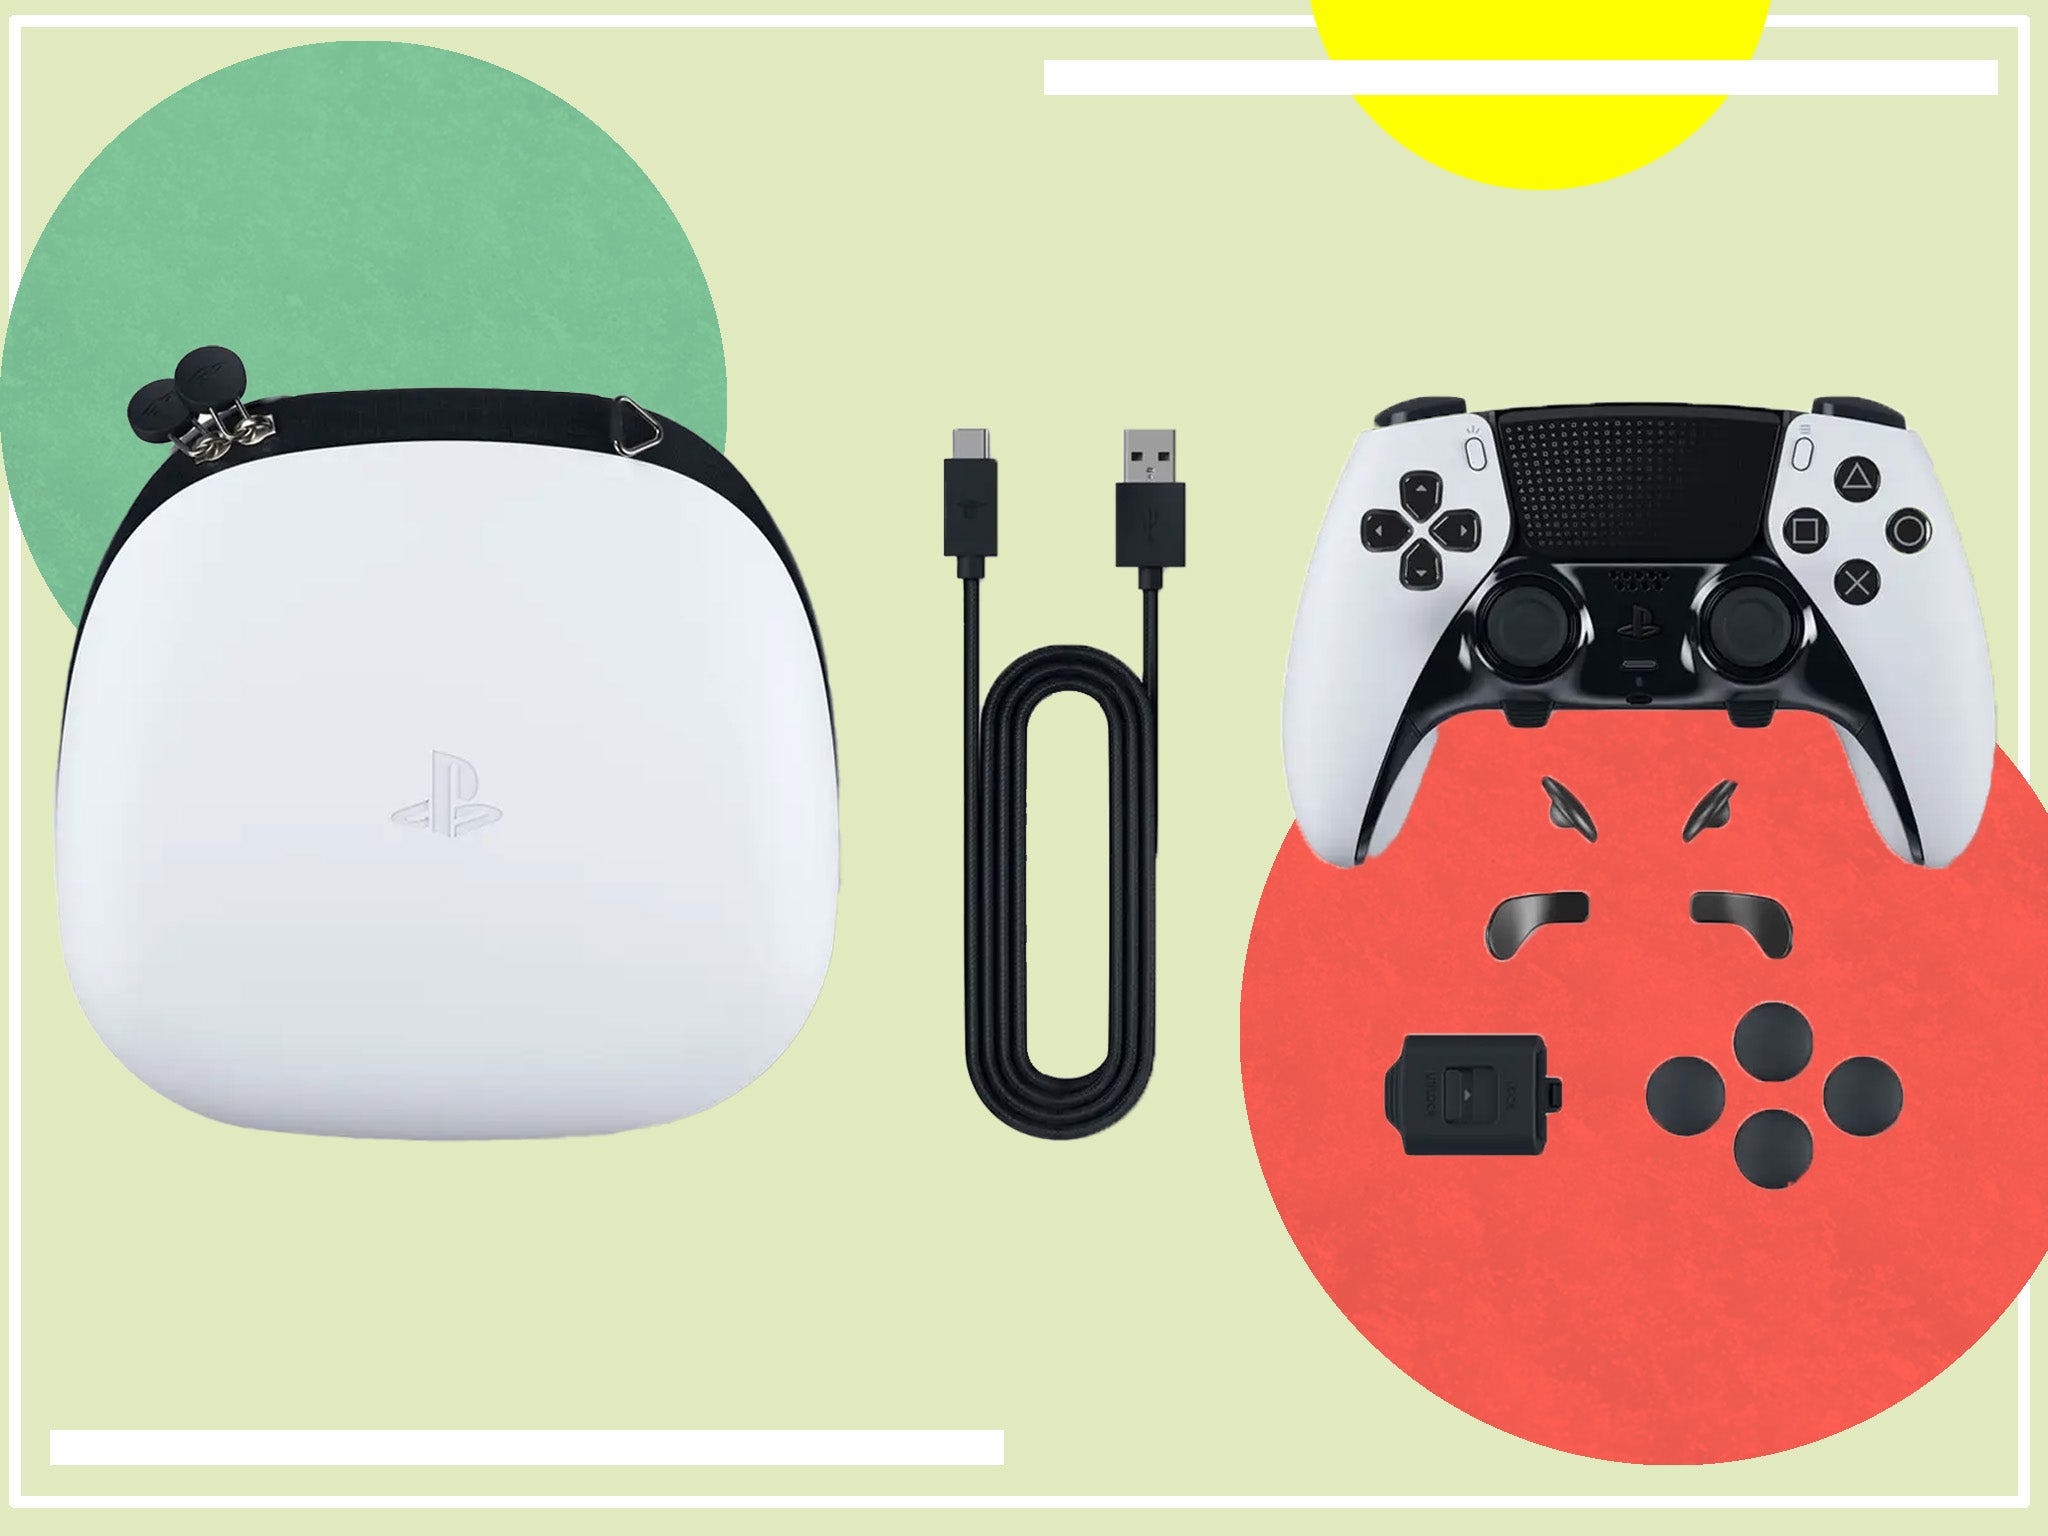 The controller comes with a carry case and plenty of customisable accessories